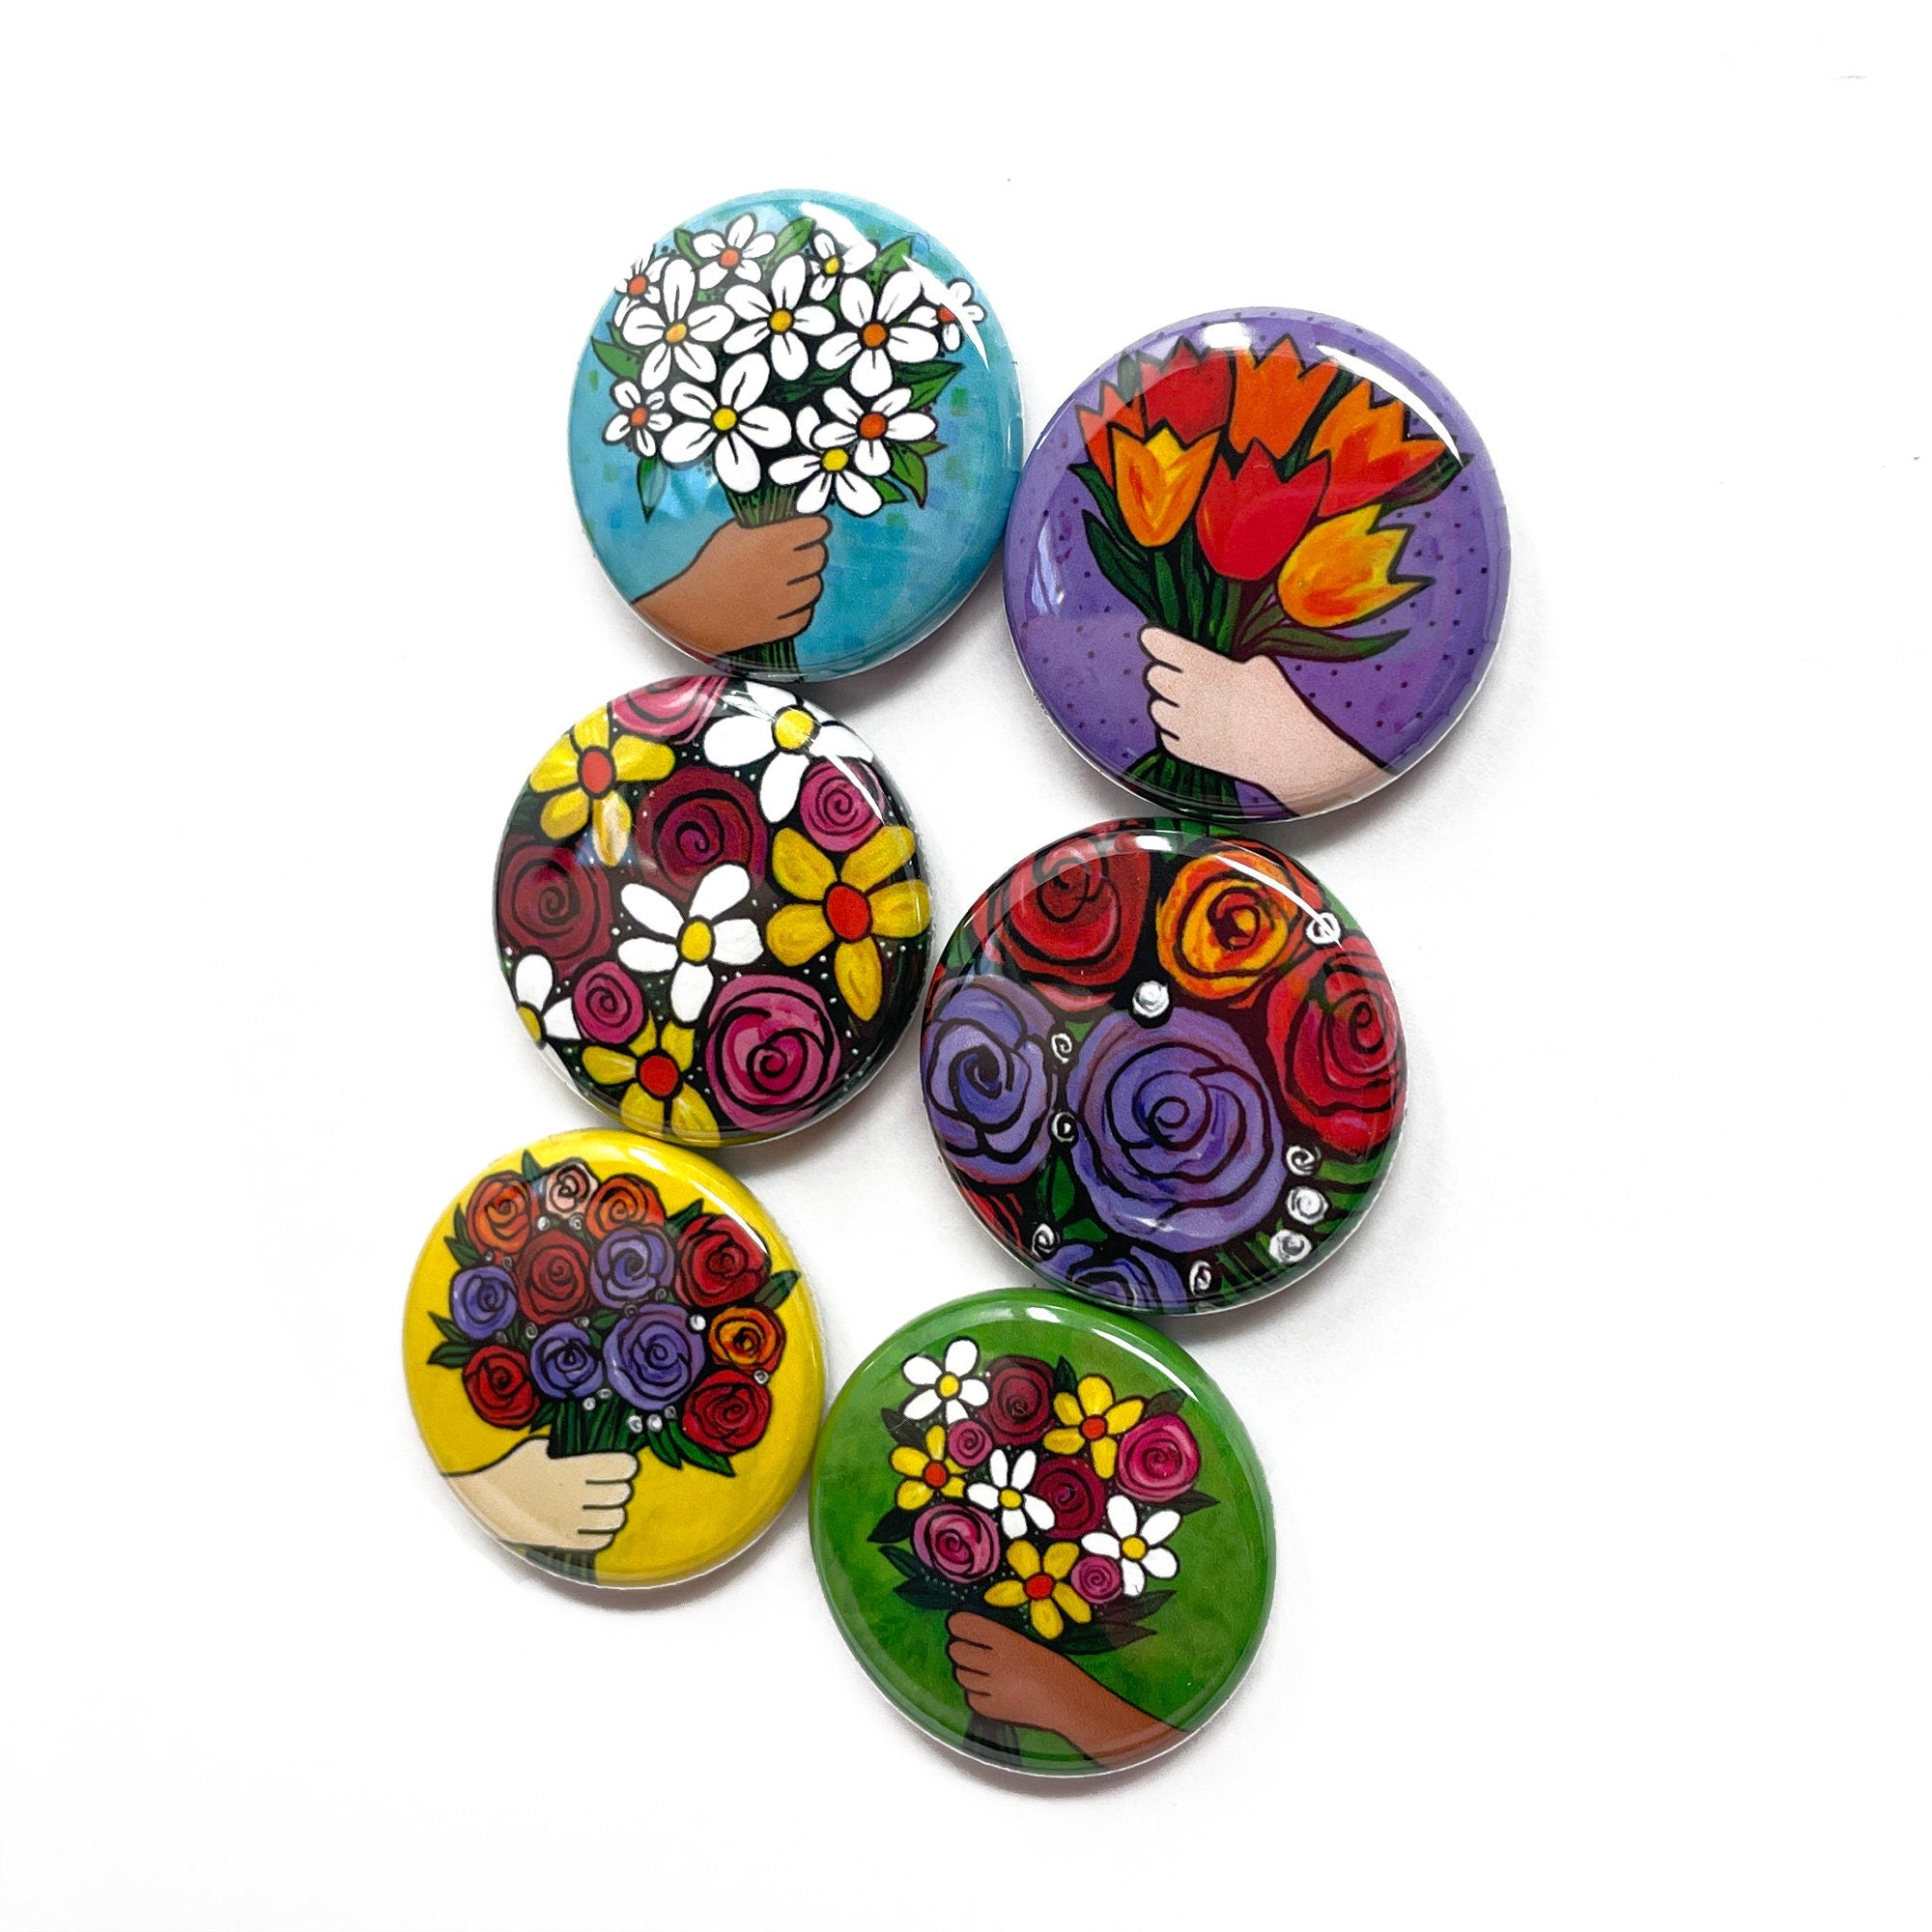 Flower Bouquet Magnets or Pins - Set of 6 Magnets or Pinback Buttons - Flower Party Favors or Stocking Stuffers